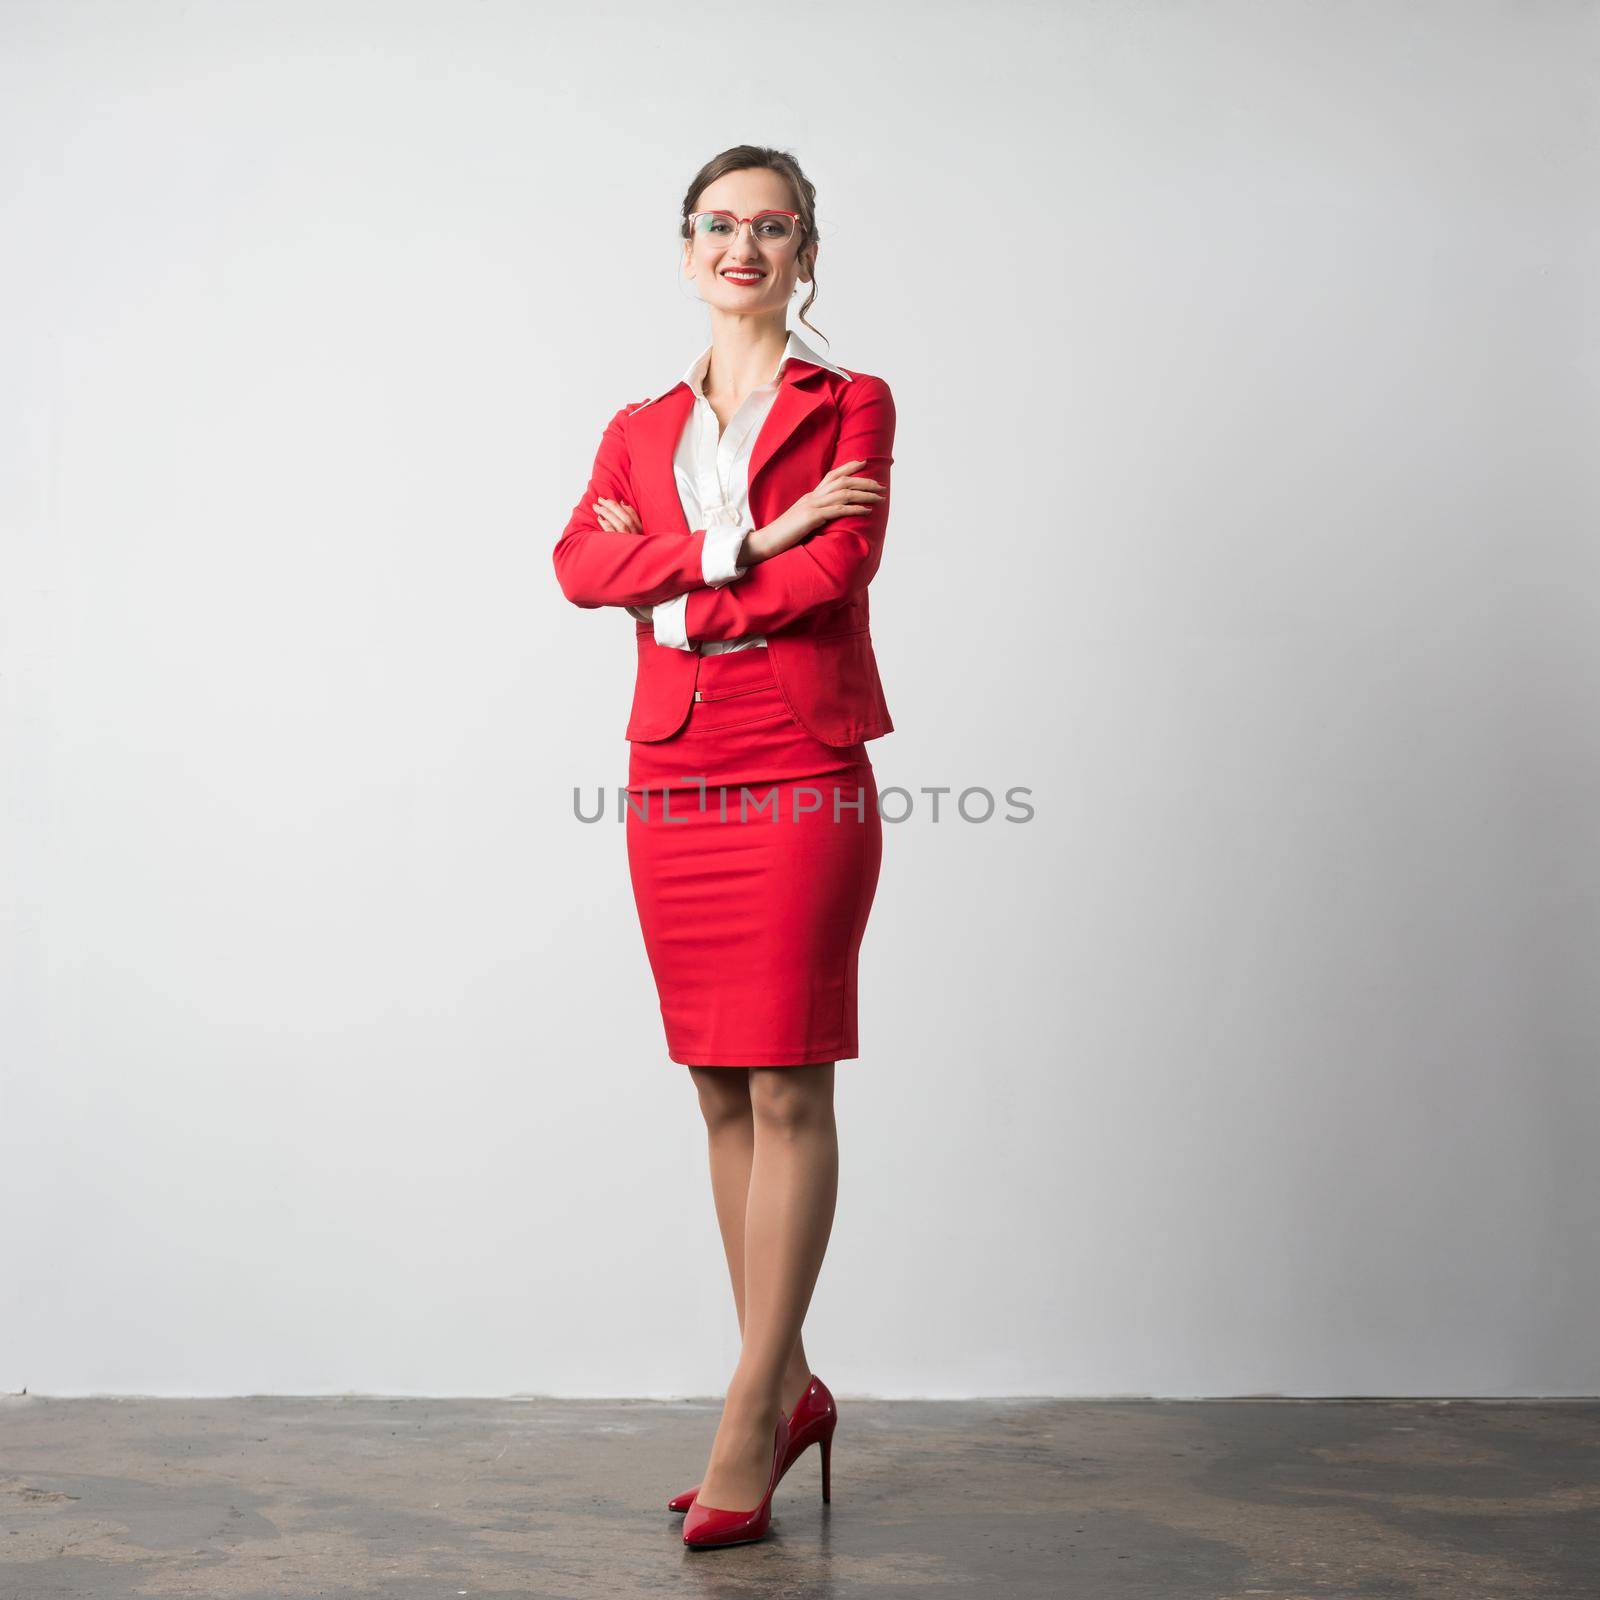 Proud businesswoman standing arms folded looking at the camera